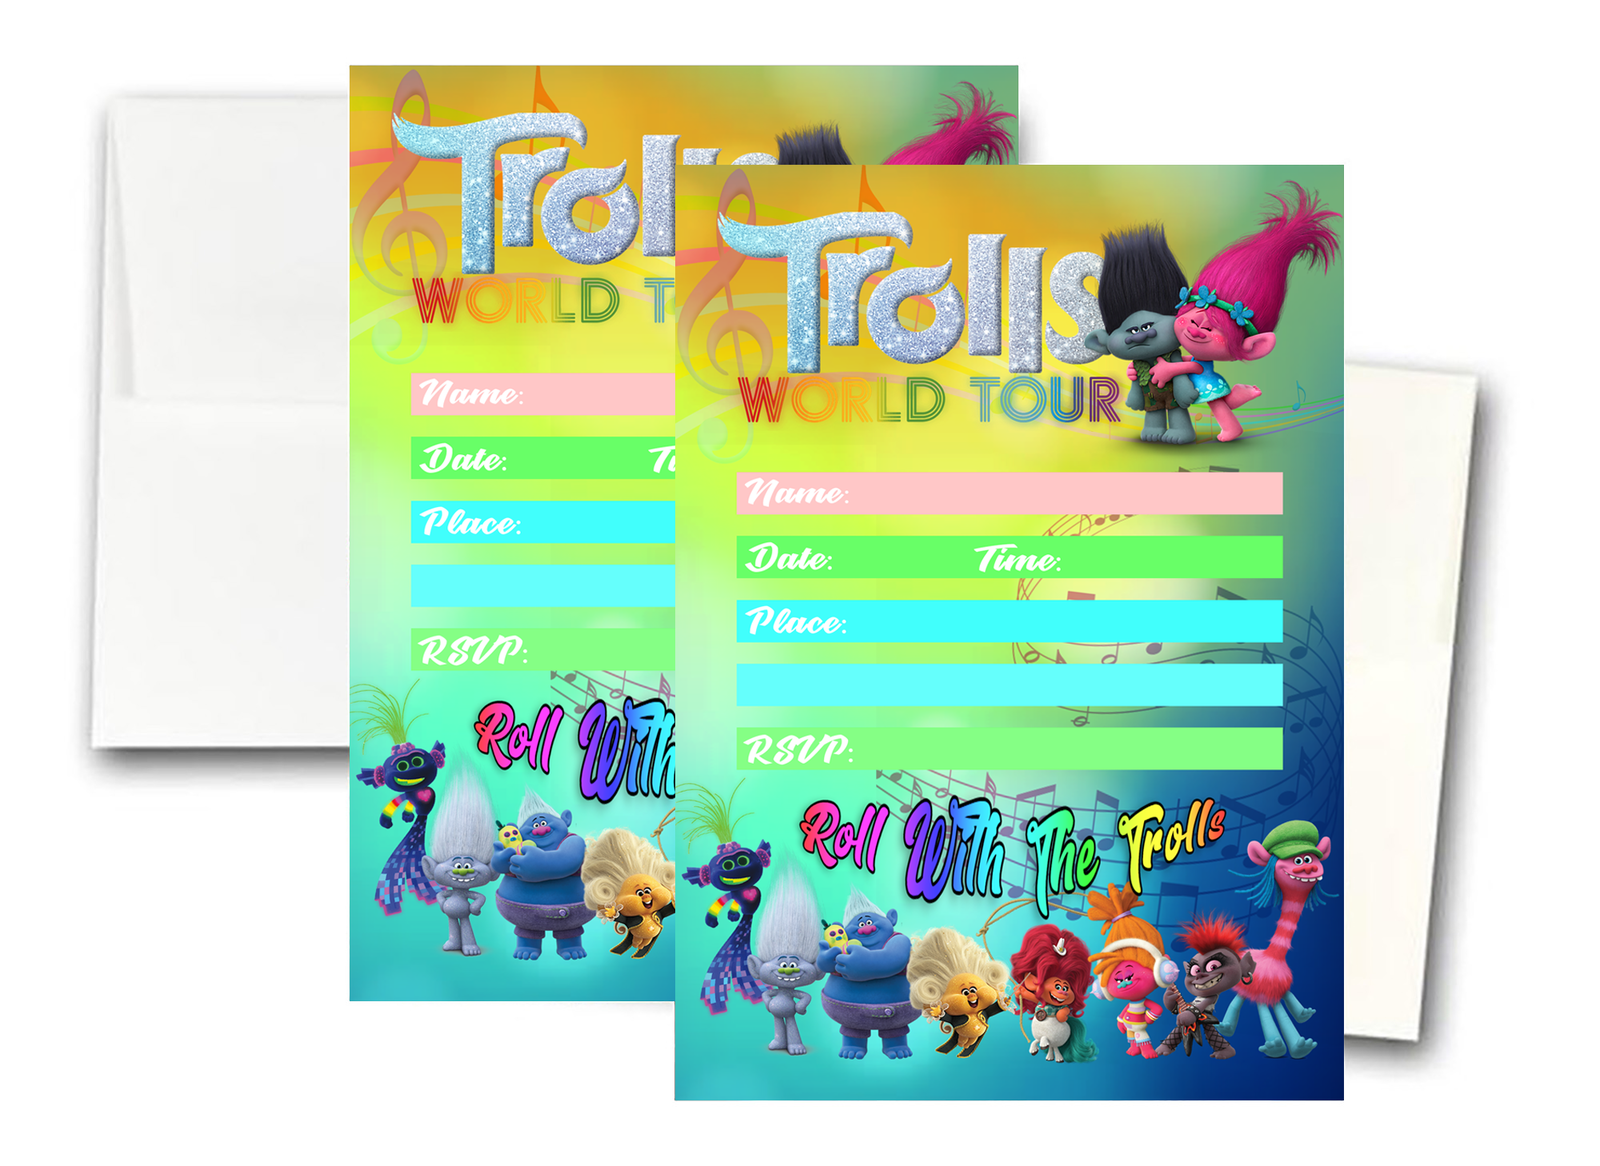 12-trolls-world-tour-birthday-invitation-cards-12-white-envelops-included-1-greeting-cards